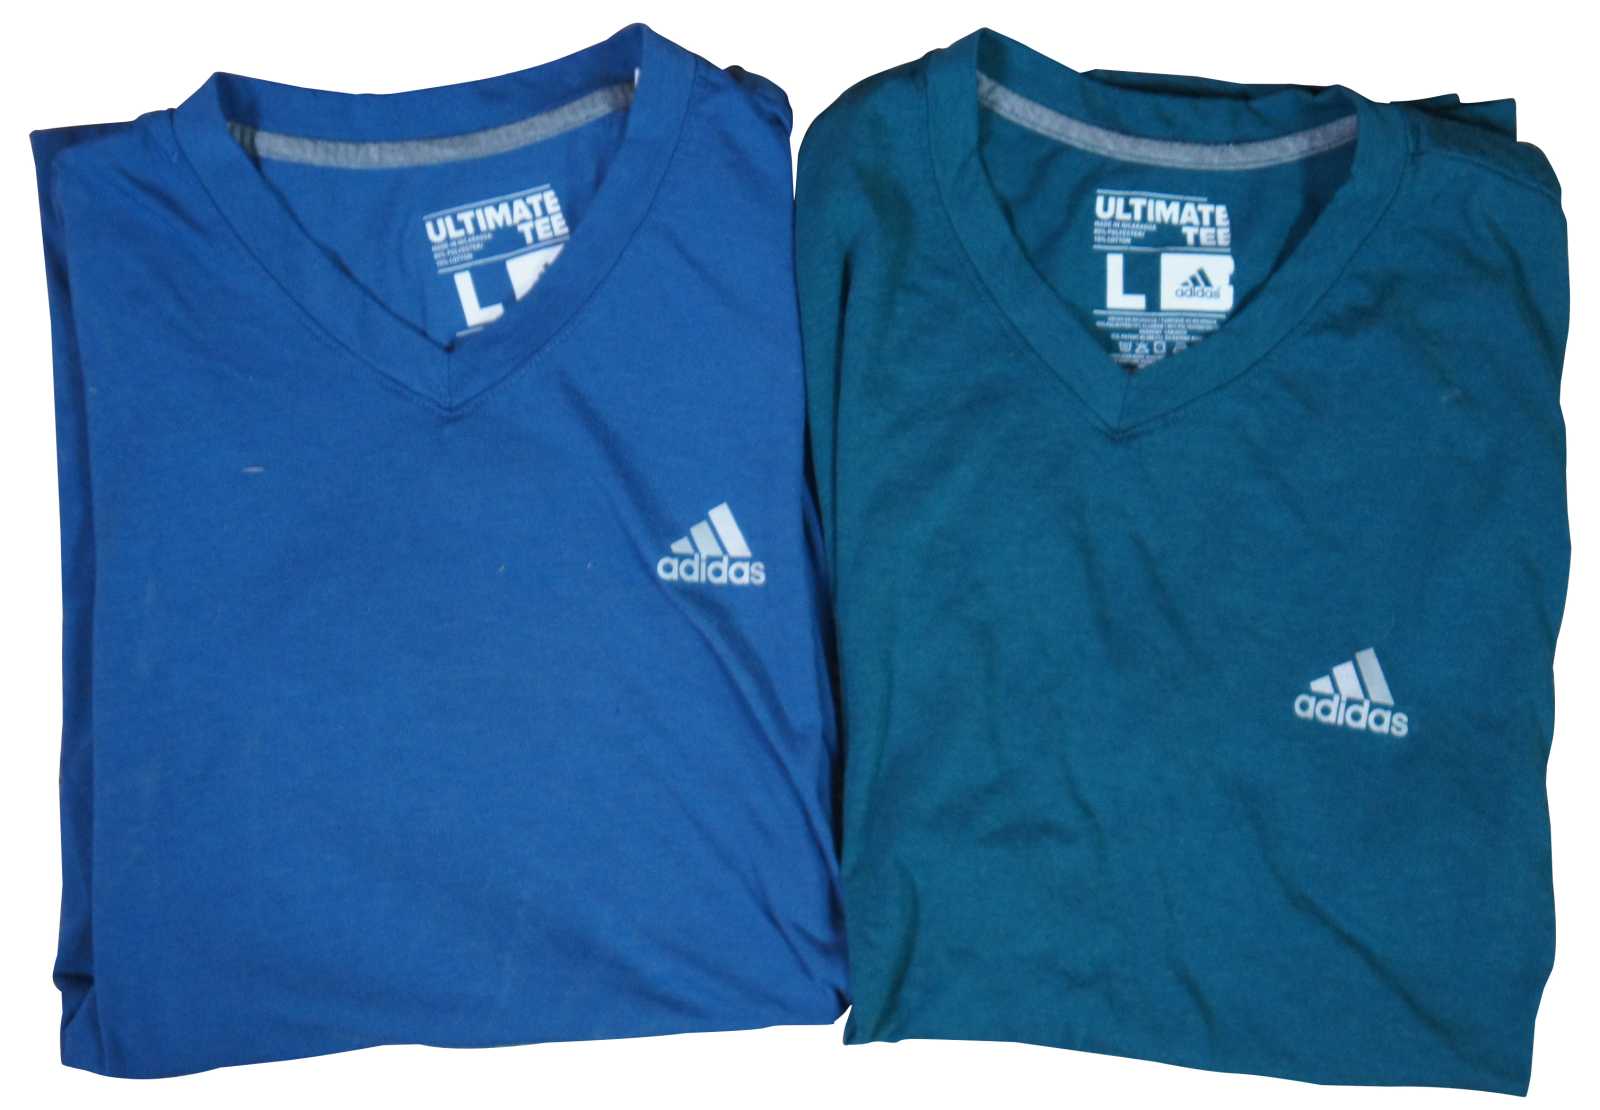 2 Adidas Ultimate Tee Climalite Mens Short Sleeve V Neck T Shirts Size L